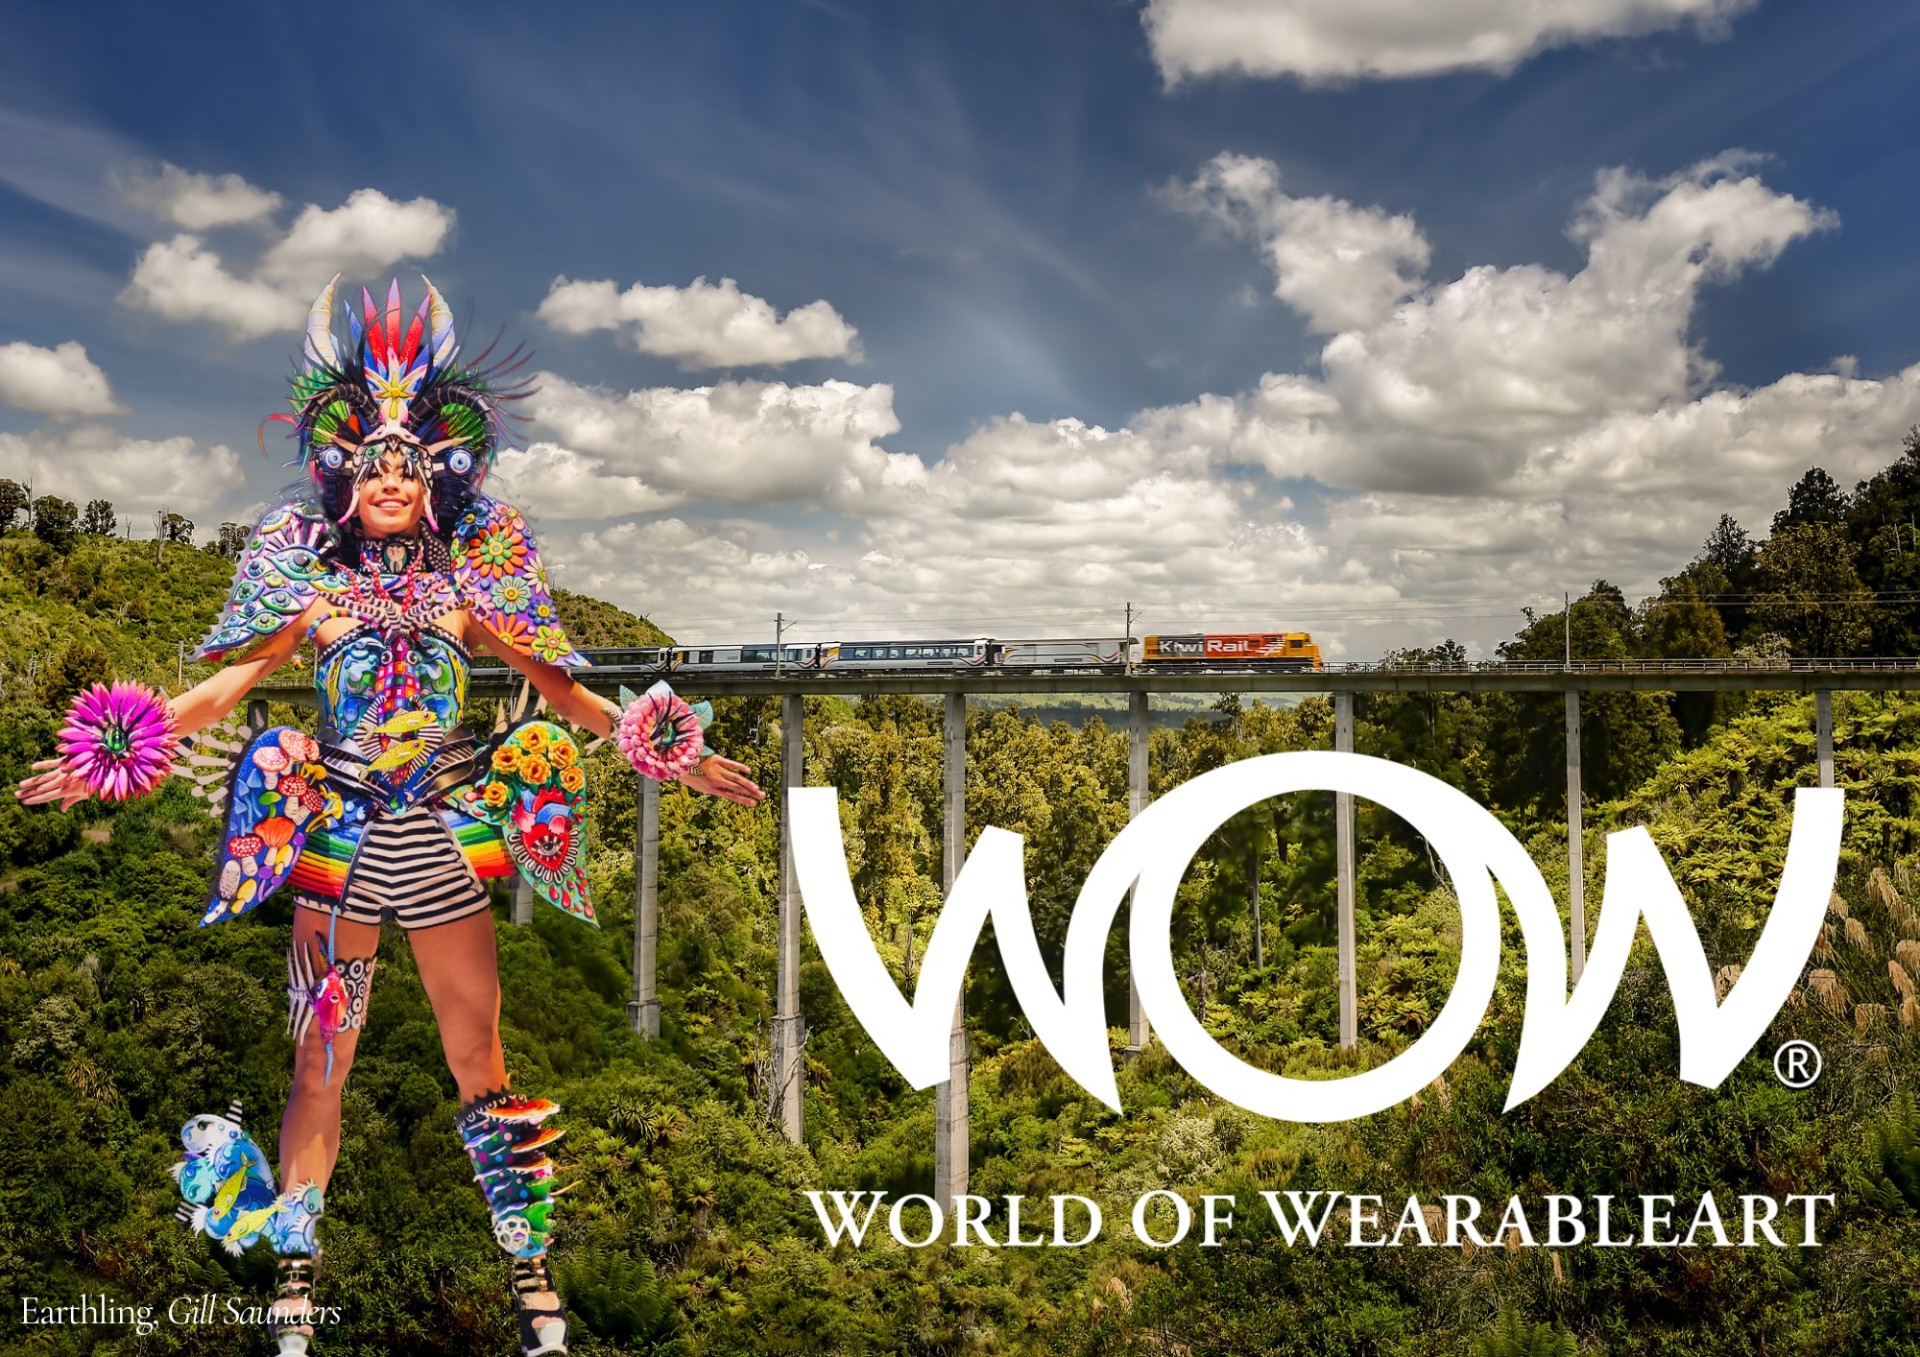 The World of Wearable Art Awards Tour by Rail.